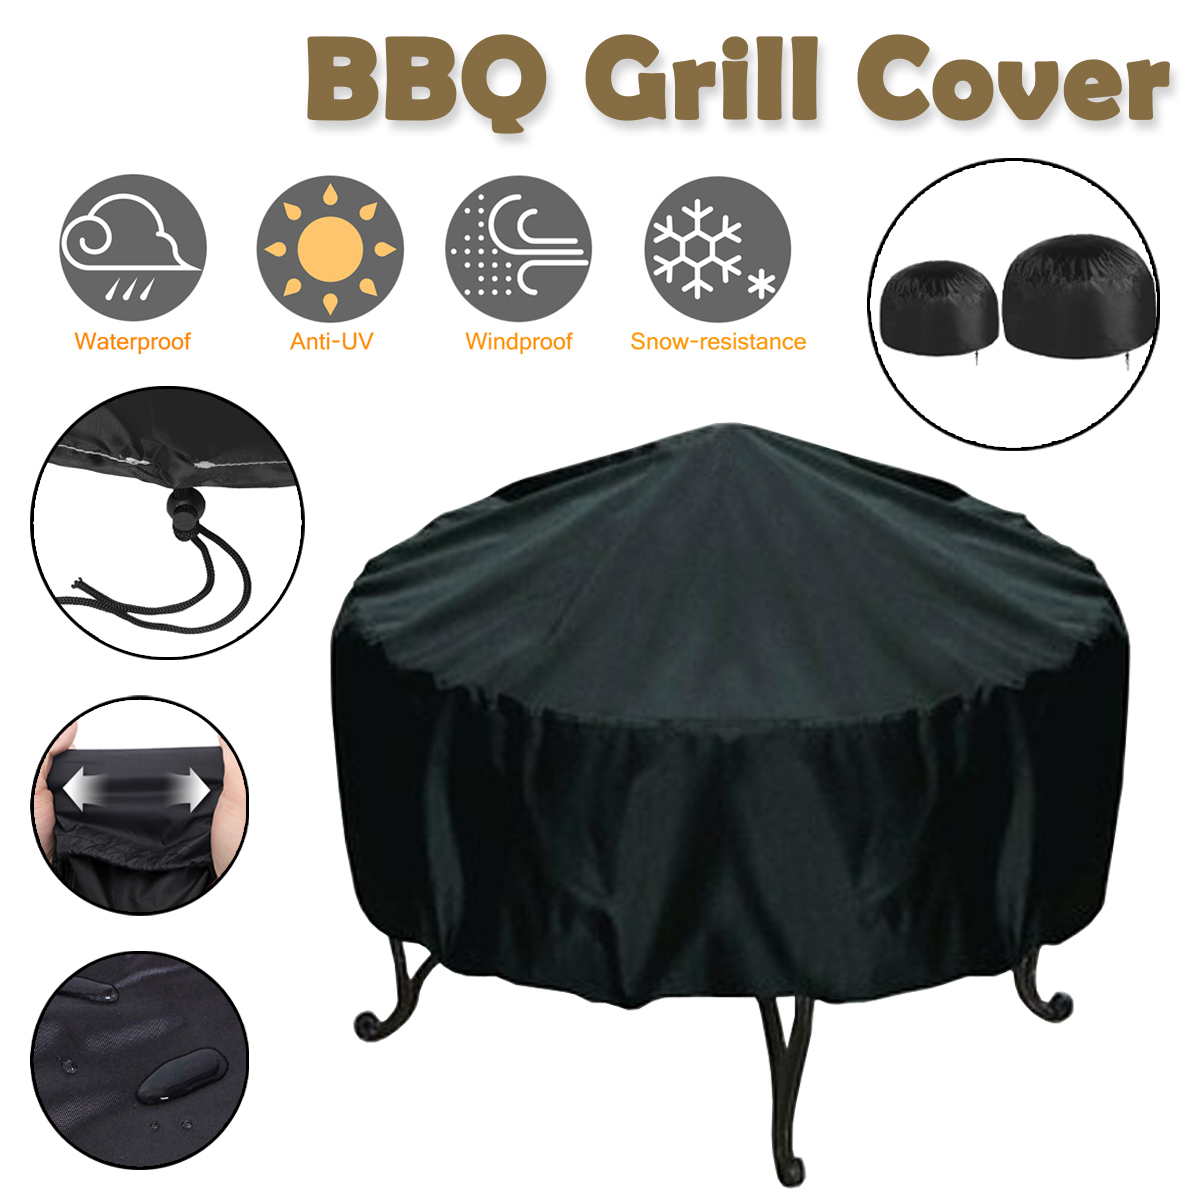 BBQ-Gill-Cover-Waterproof-UV-Protector-Gas-Charcoal-Burner-Round-Cover-Outdoor-Camping-Picnic-1779888-1